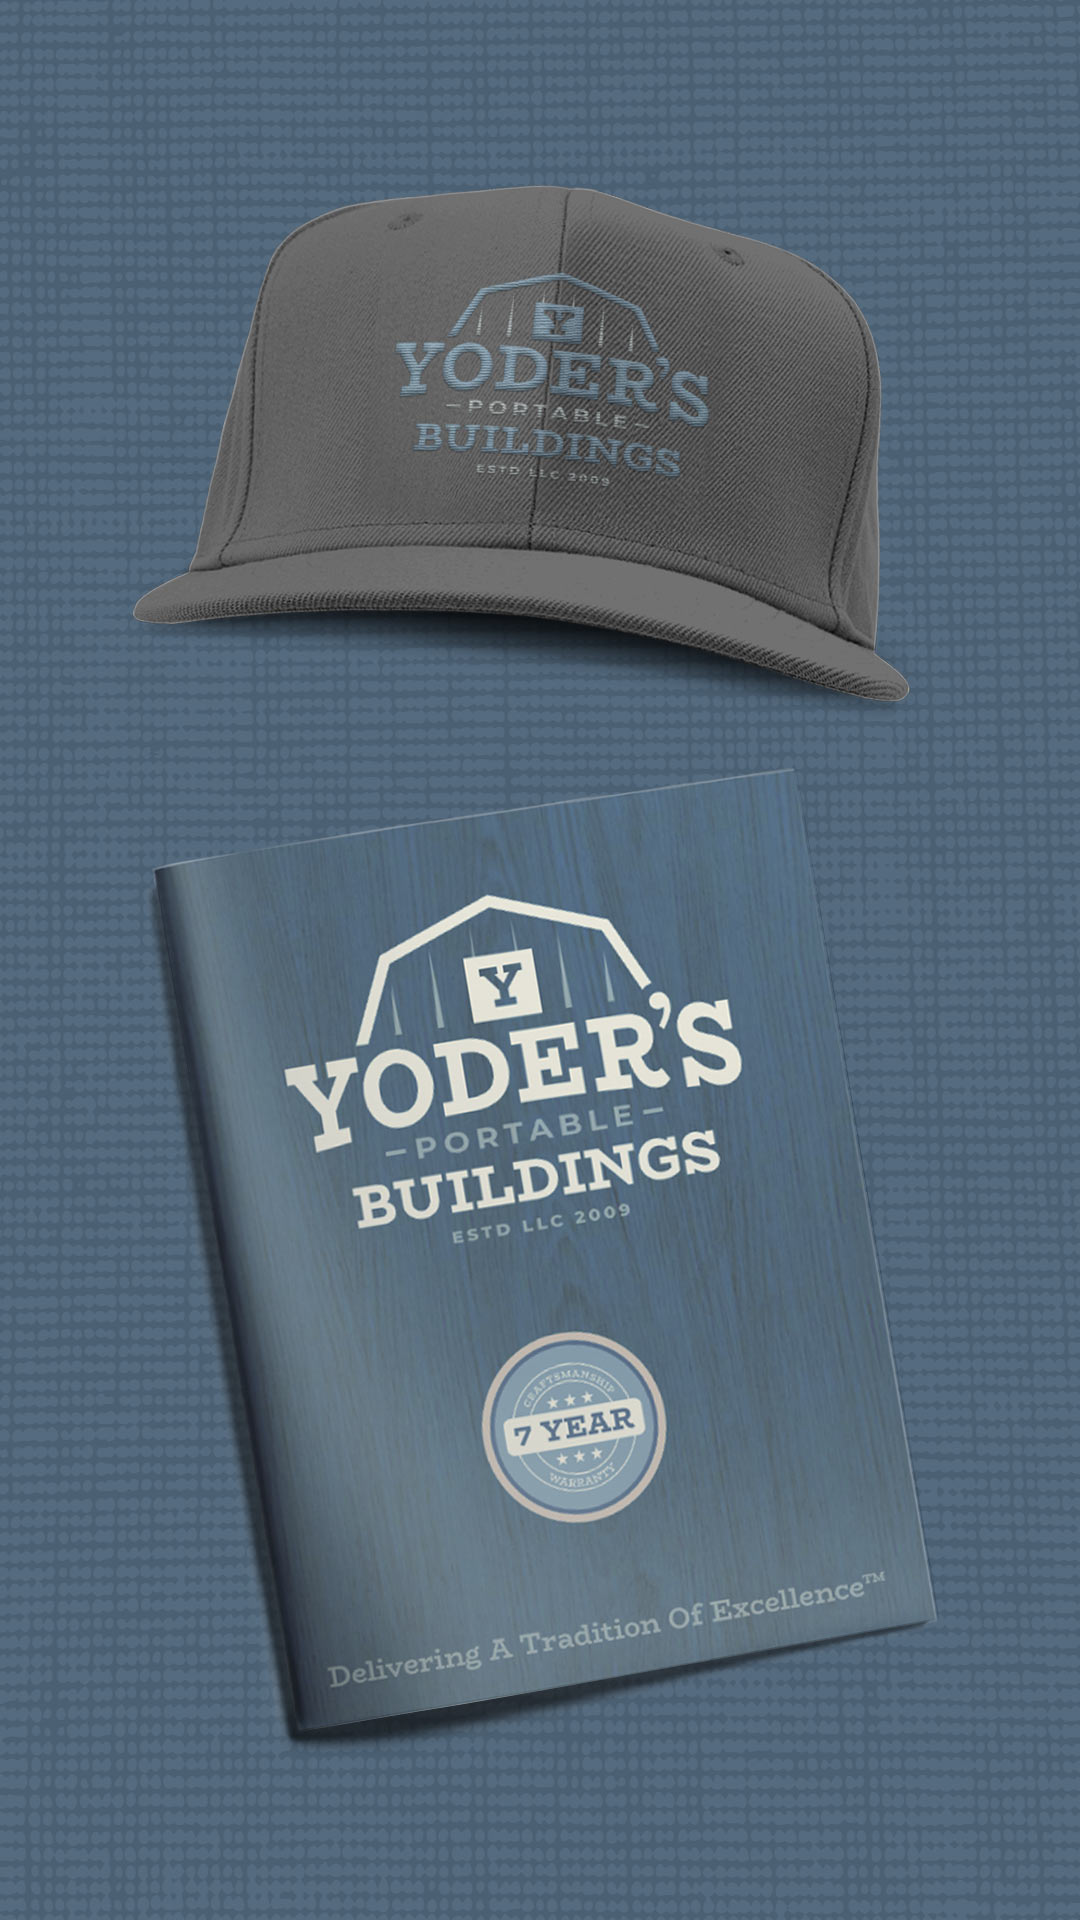 yoders portable buildings brochure and hat